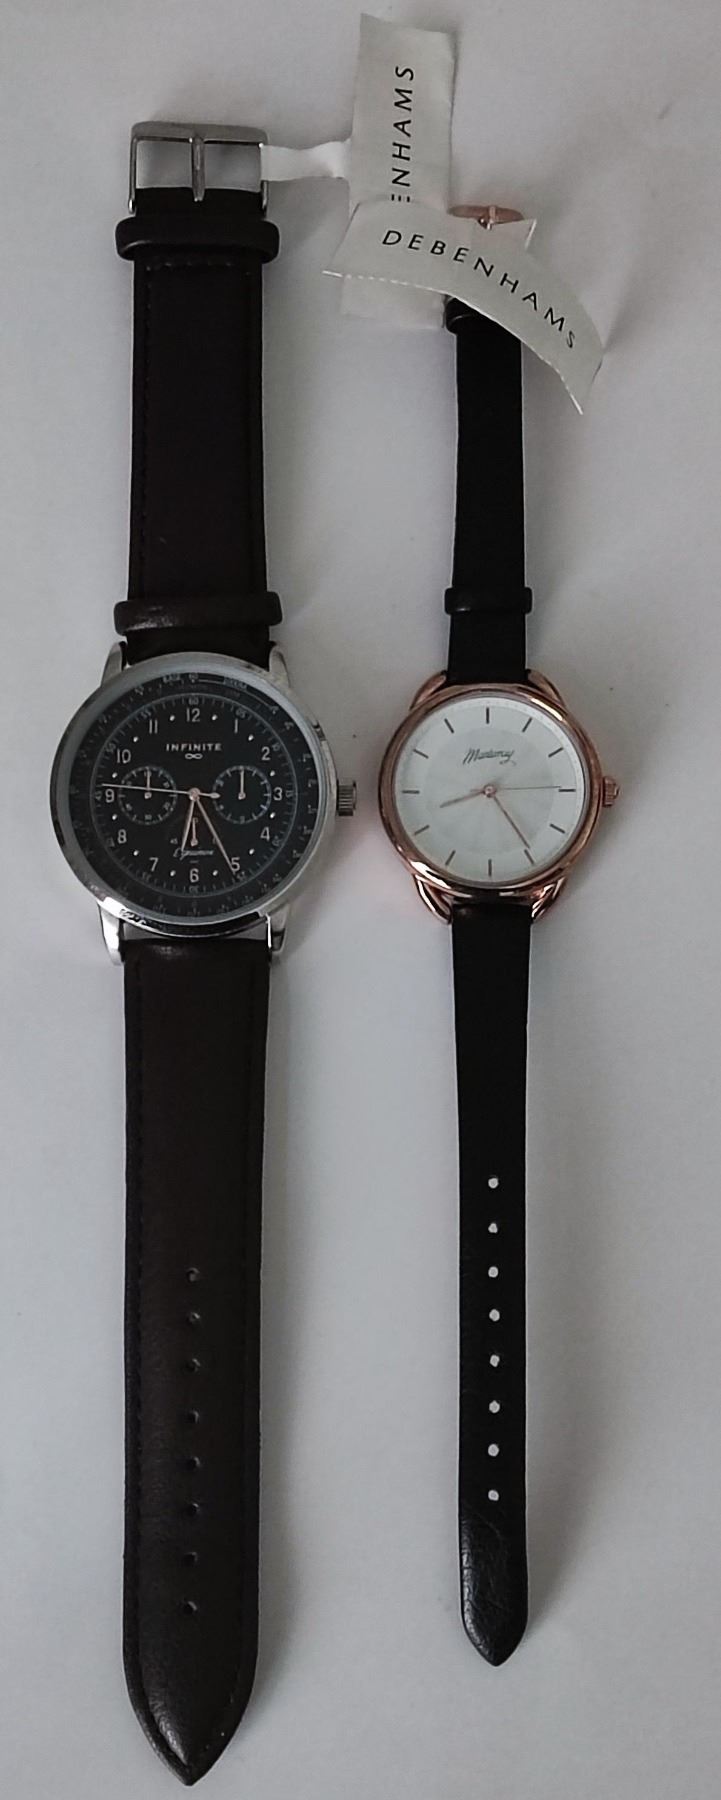 A Lady's Mantaray watch and Gent's Infinite watch - Image 2 of 2